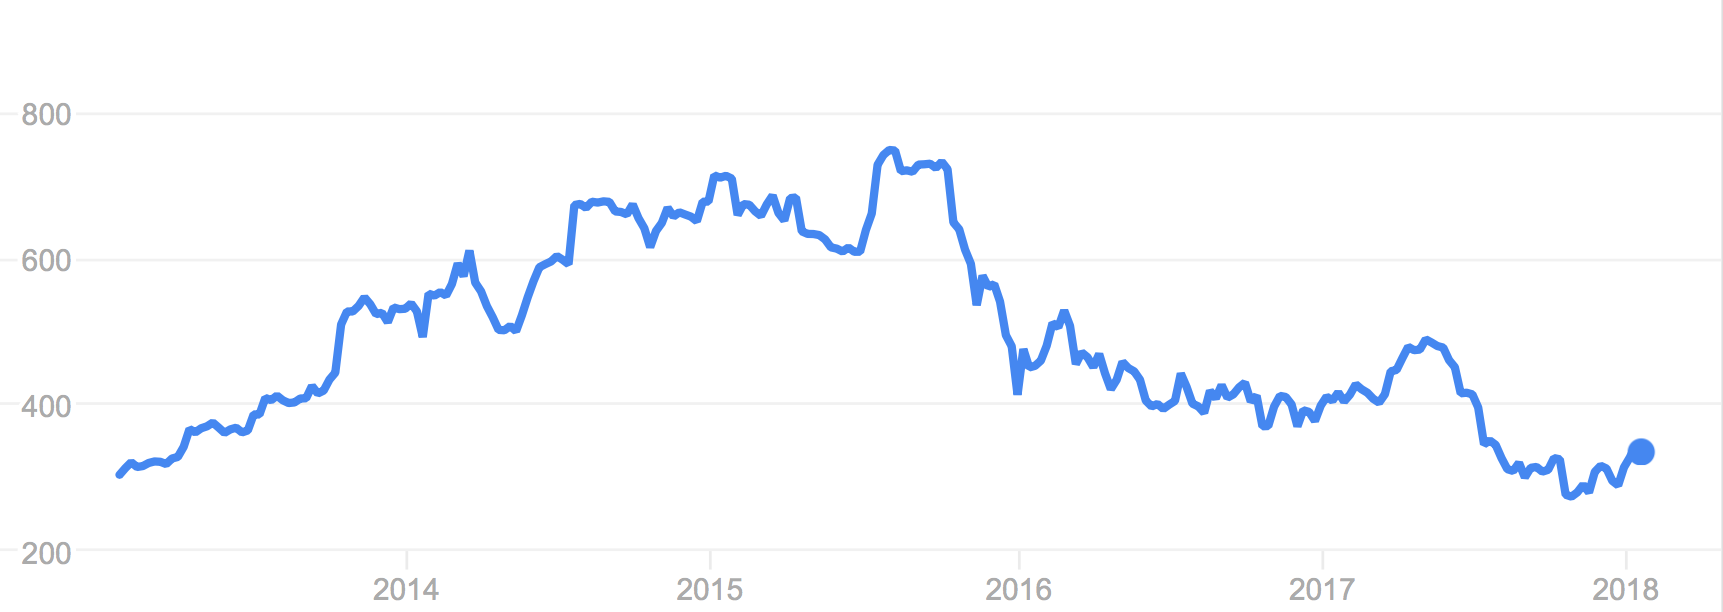 chipotle stock price before and after outbreak